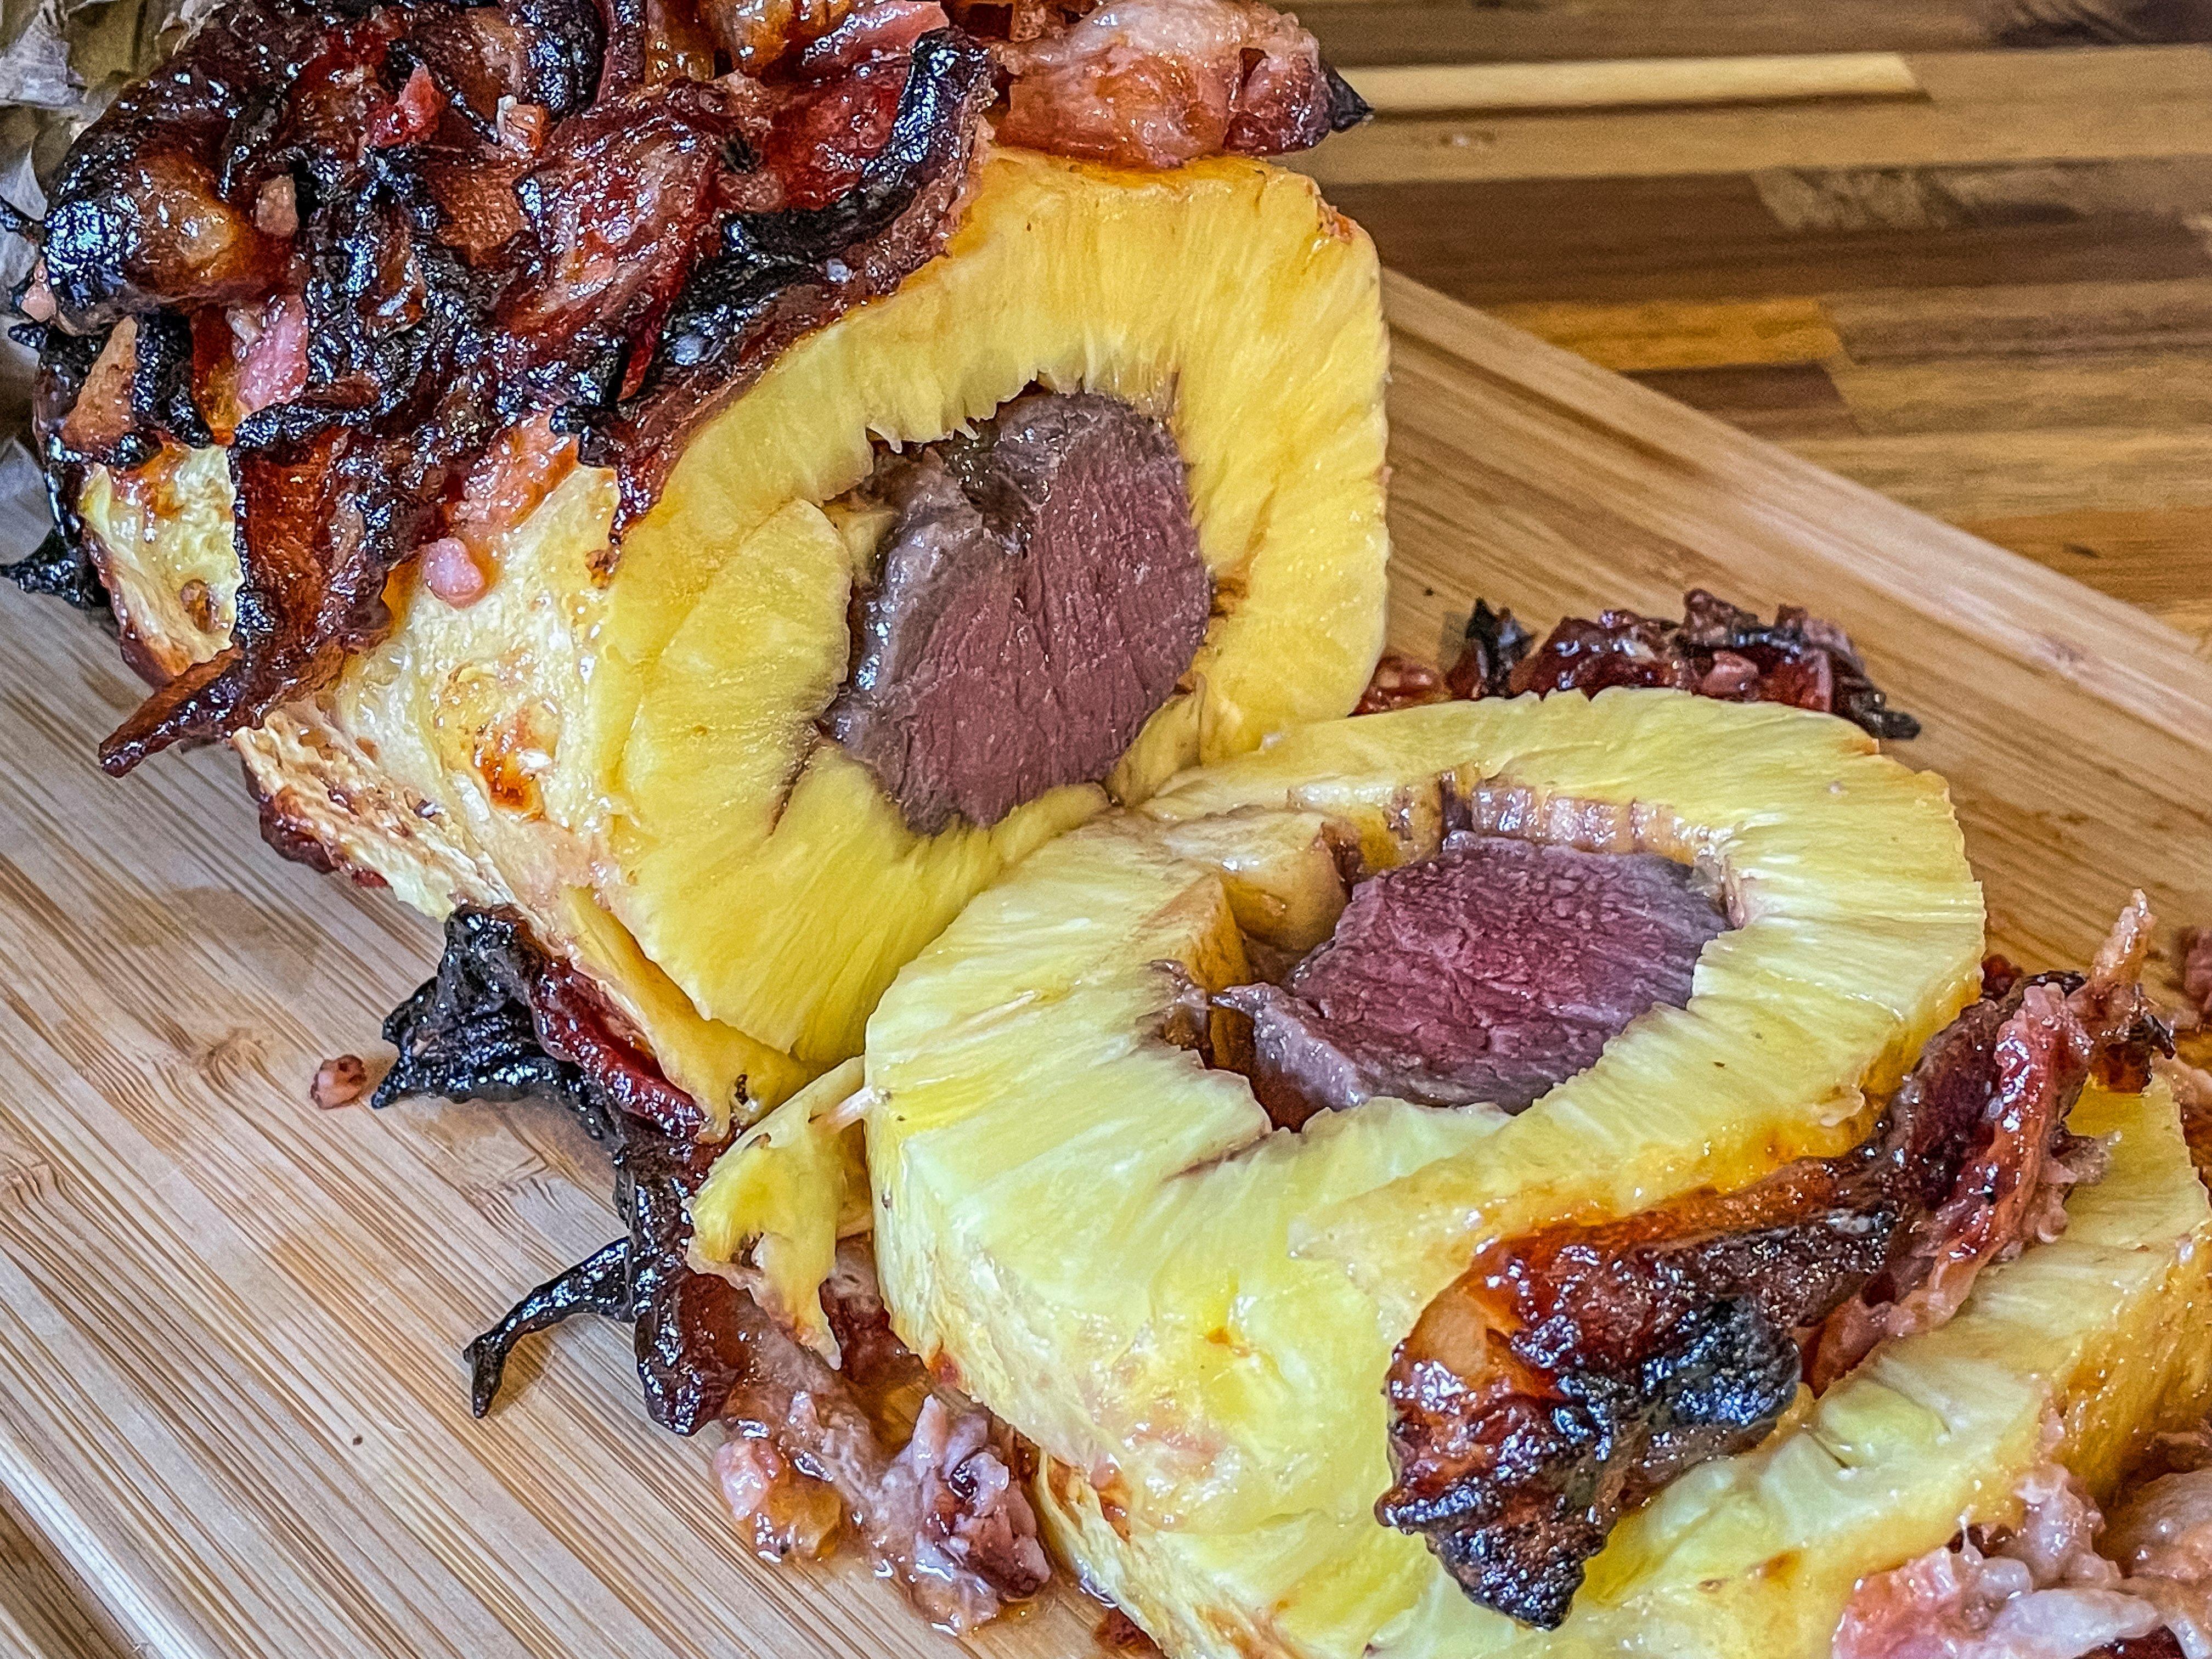 Slice through the pineapple and backstrap for serving.